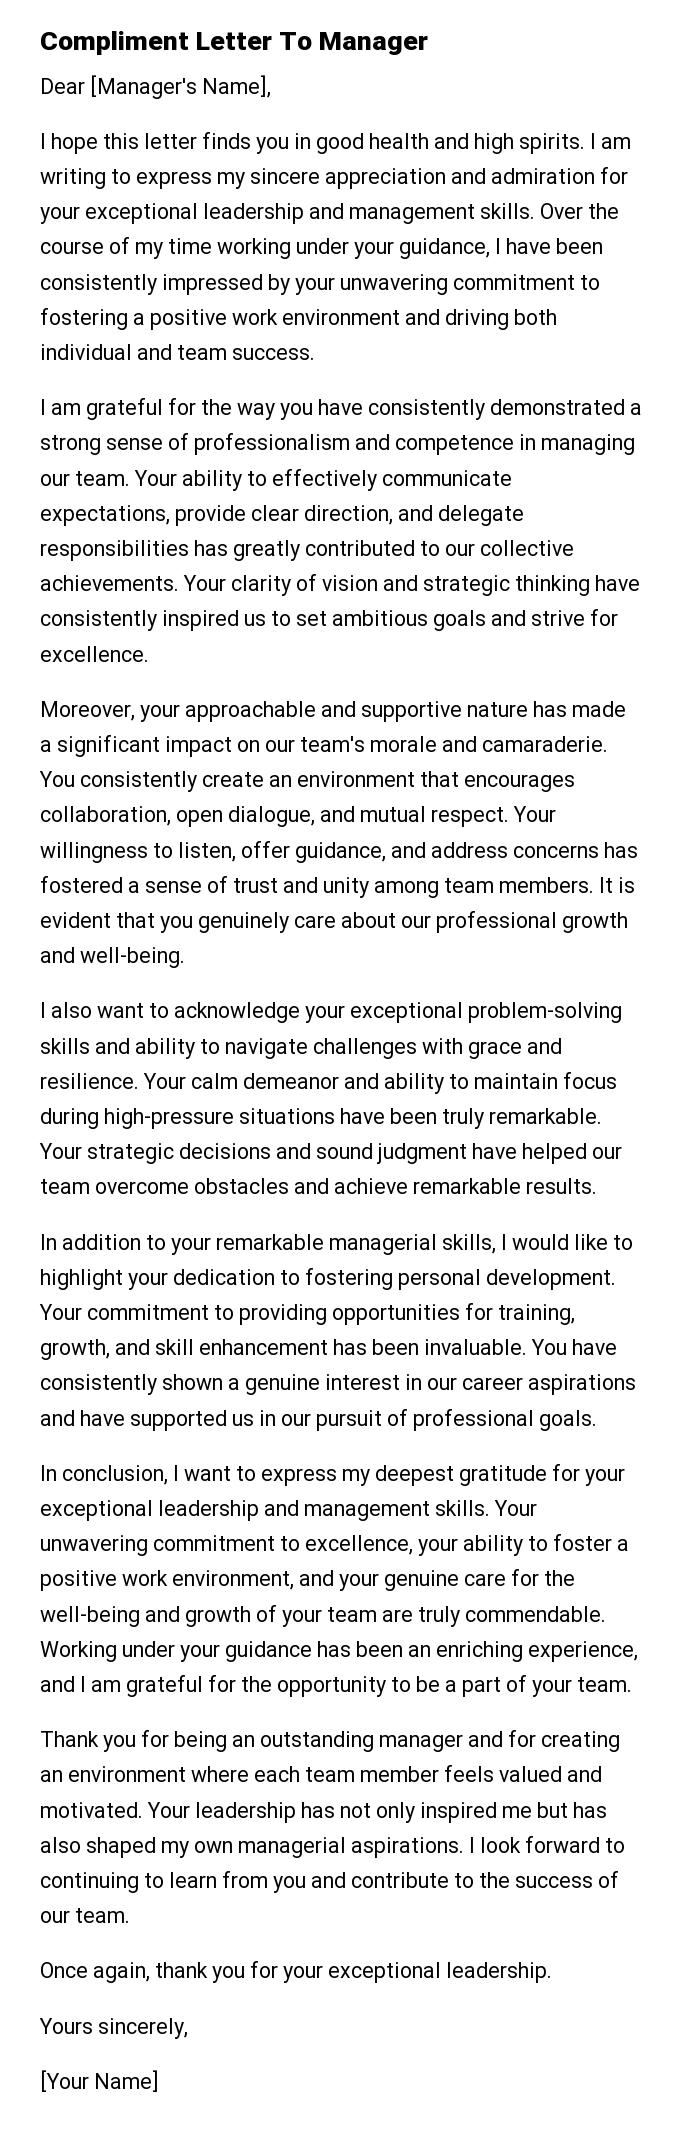 Compliment Letter To Manager